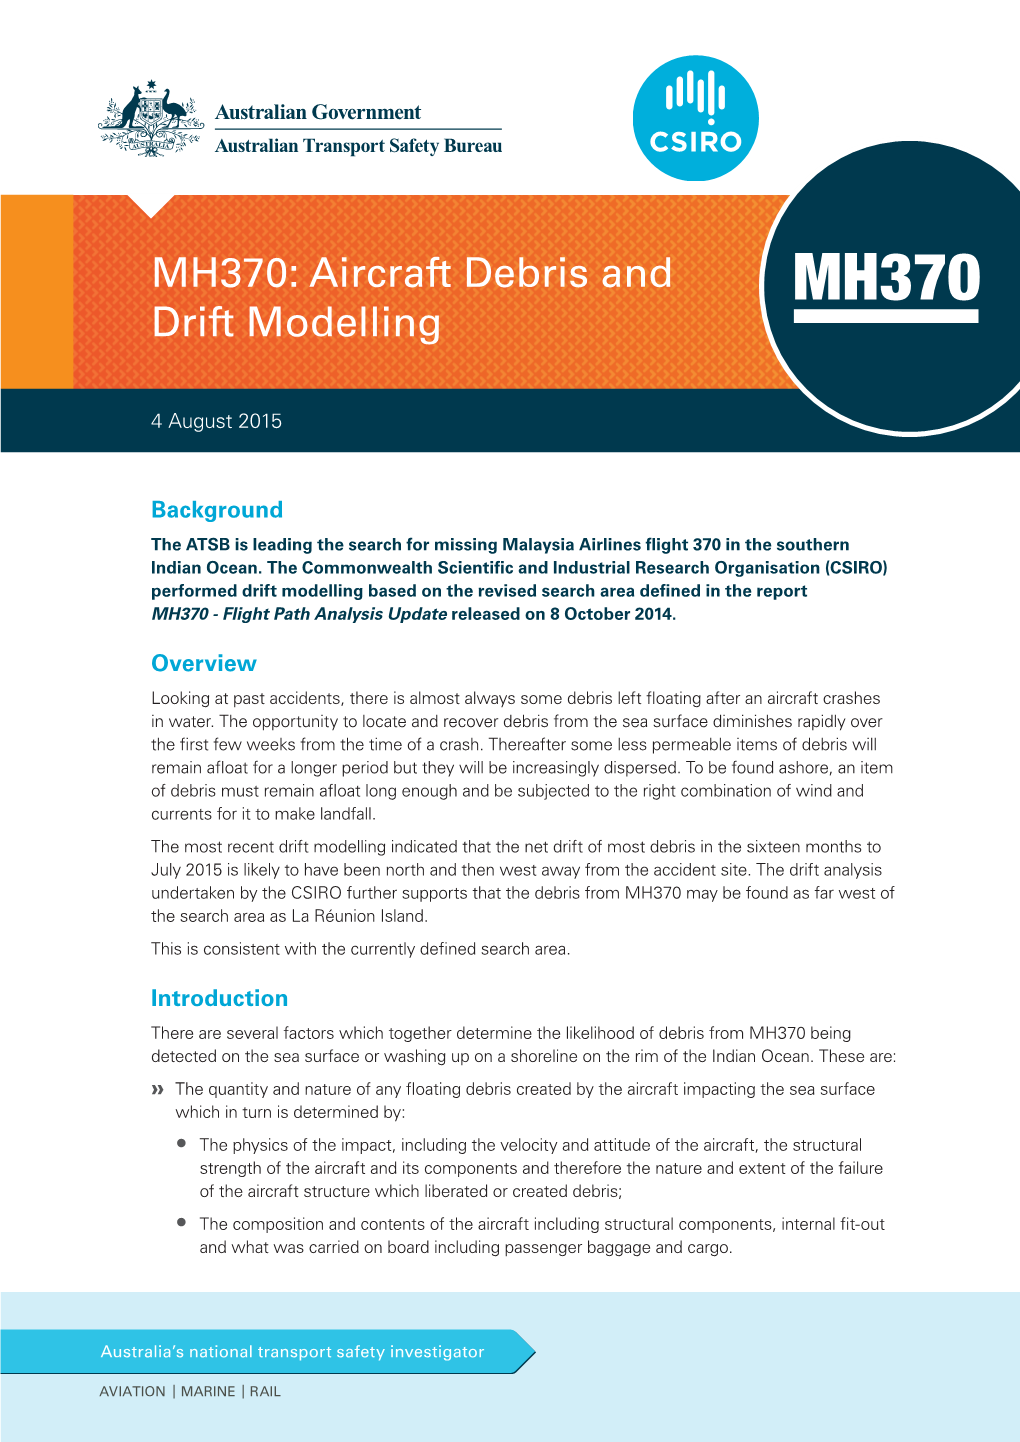 MH370: Aircraft Debris and Drift Modelling